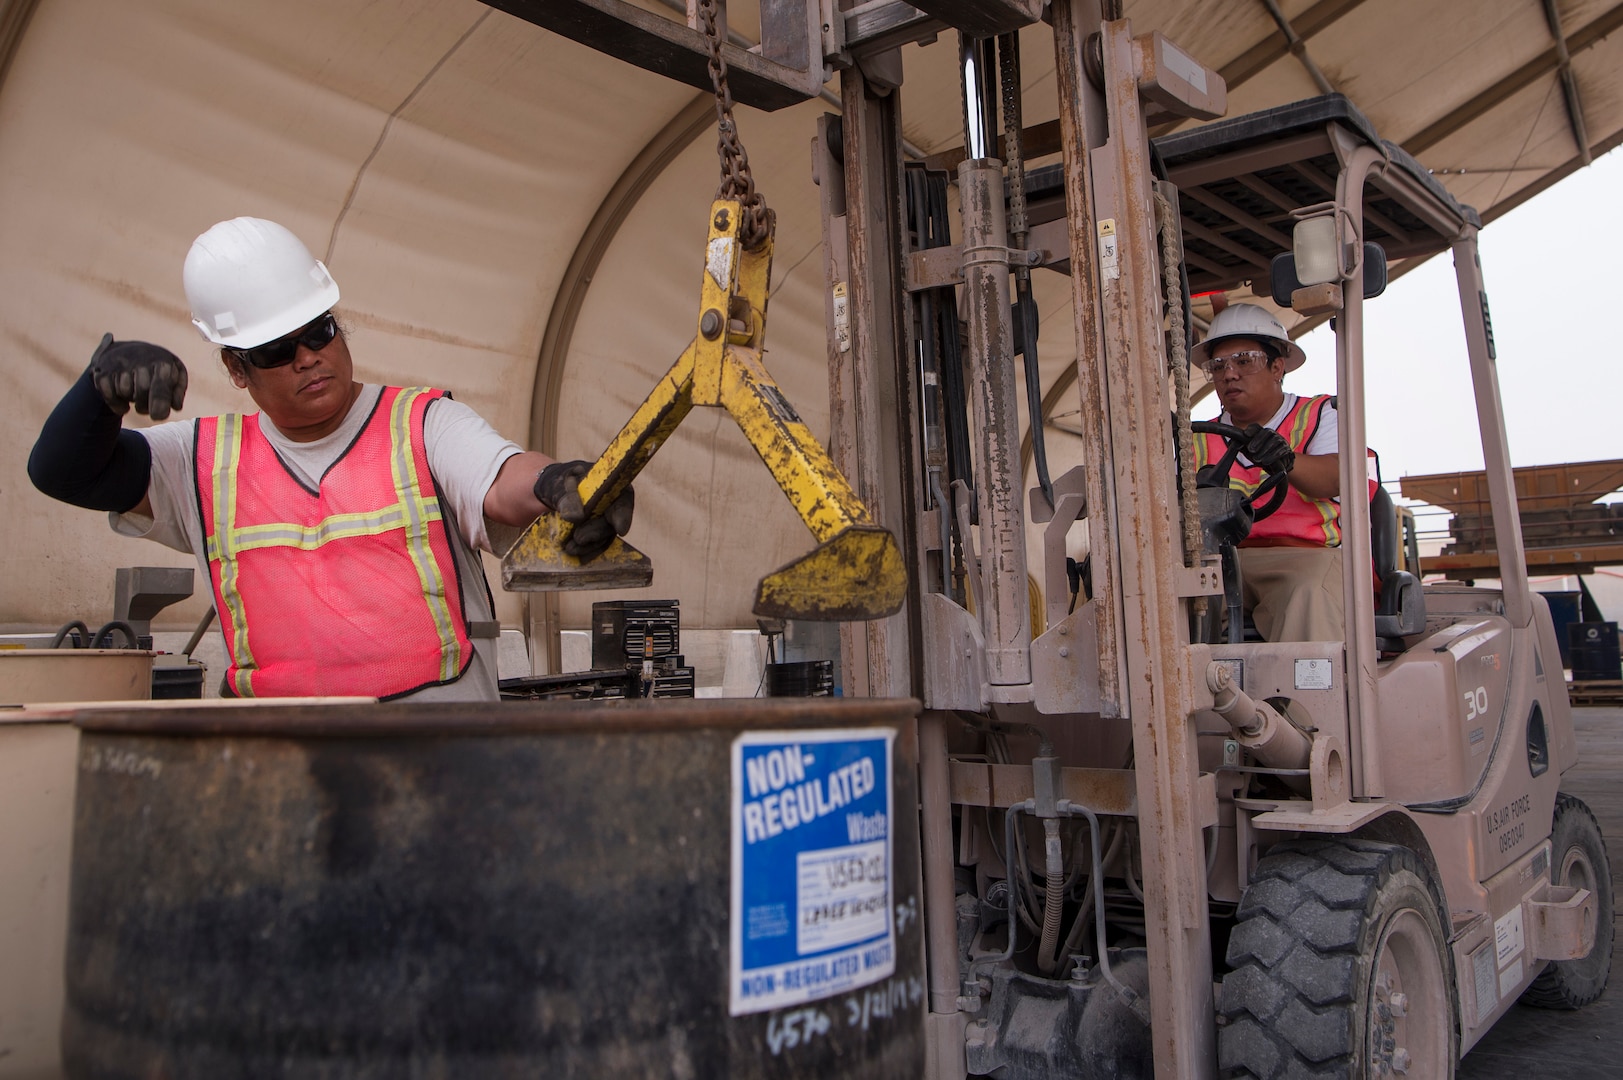 Marino Menor, left, 379th Expeditionary Civil Engineer Squadron (ECES) lead environmental technician, and Ramon Gonzales, 379th ECES environmental technician, prepare to ventilate an oil drum to ensure the barrel is safe for handling March 26, 2019, at Al Udeid Air Base, Qatar. The ECES environmental team ensures Airmen on base are able to safely handle hazardous material (HAZMAT) in an environmentally friendly manner. (U.S. Air Force photo by Tech. Sgt. Christopher Hubenthal)